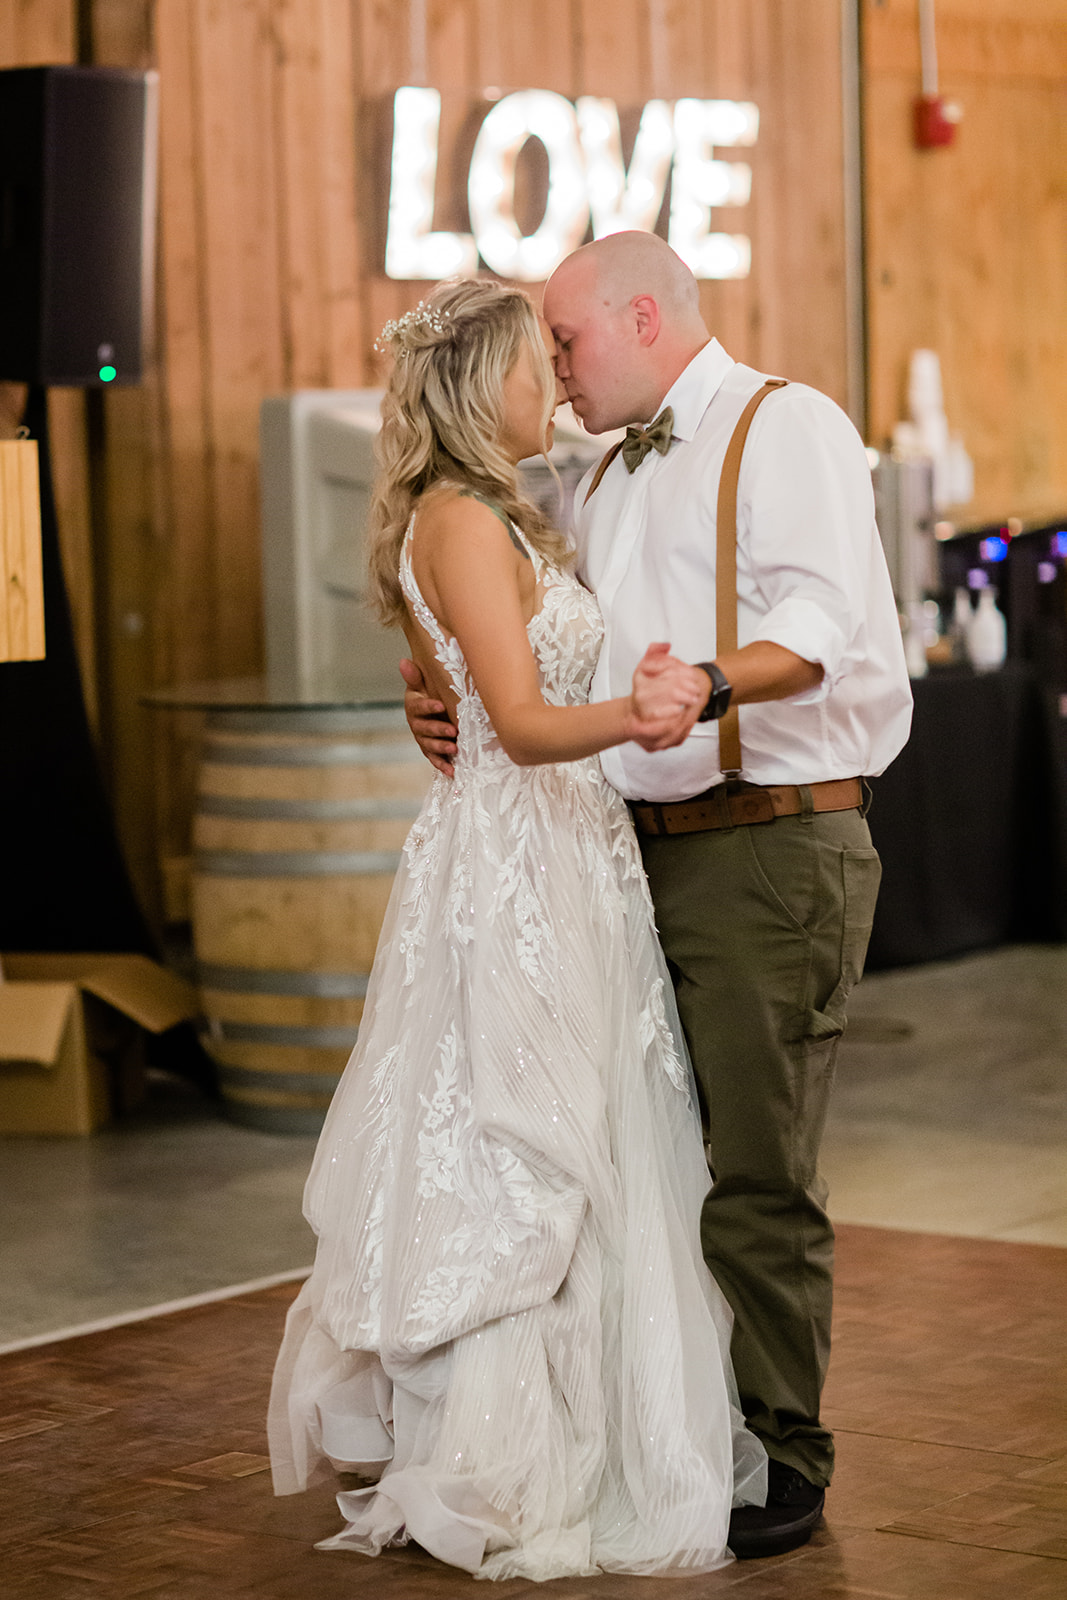 Couples' first dance at rustic Wedding